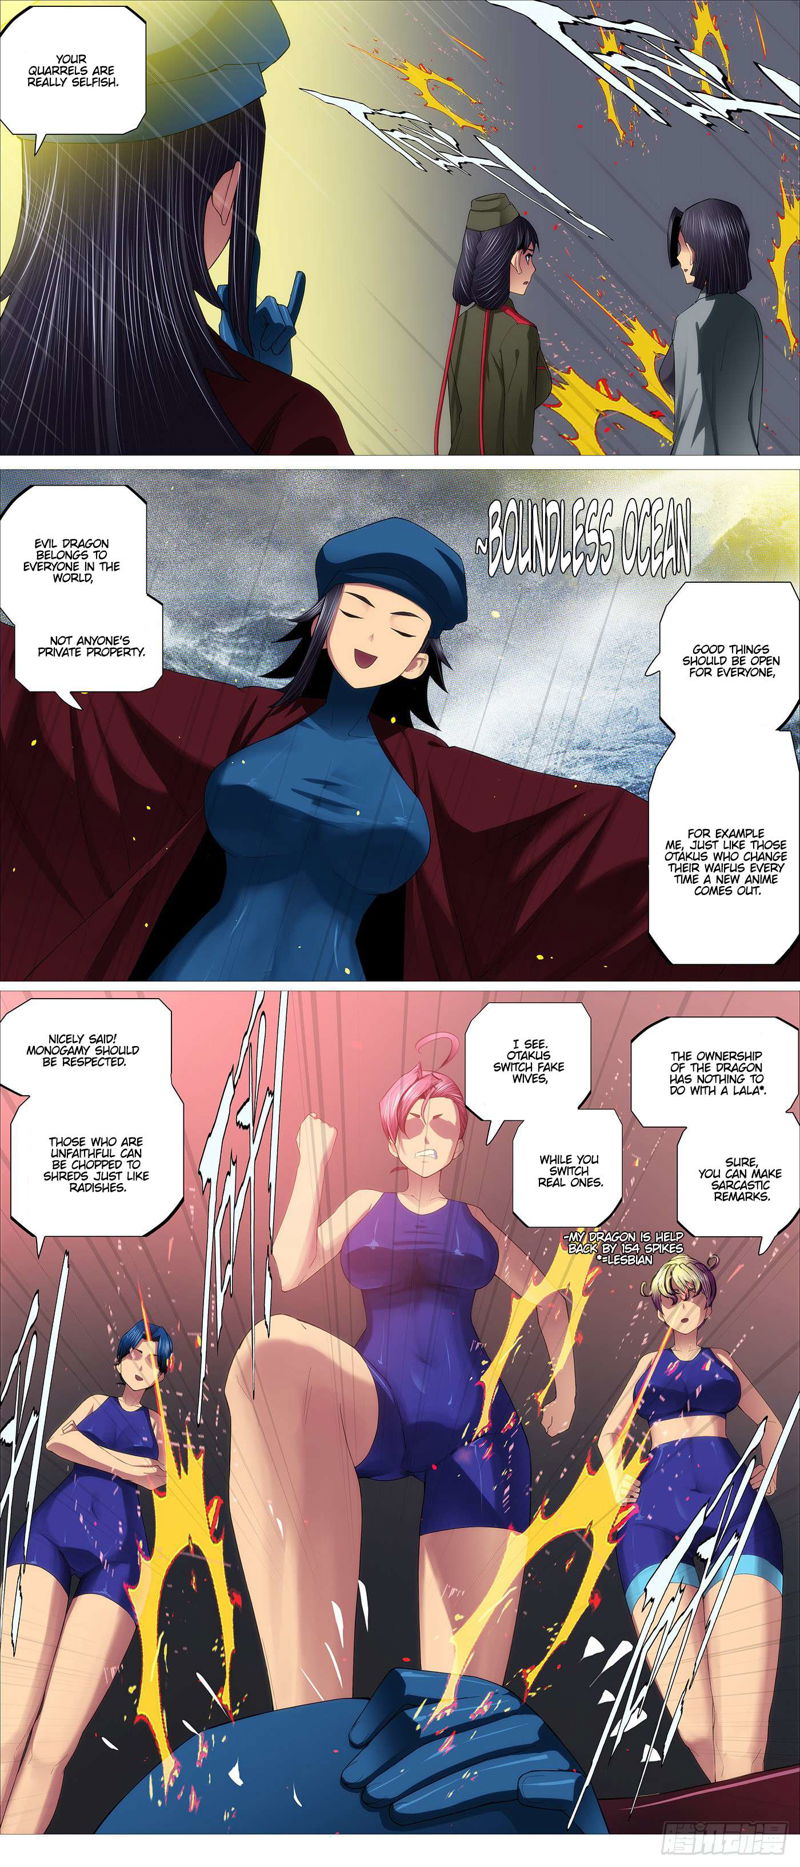 Iron Ladies Chapter 560 page 8